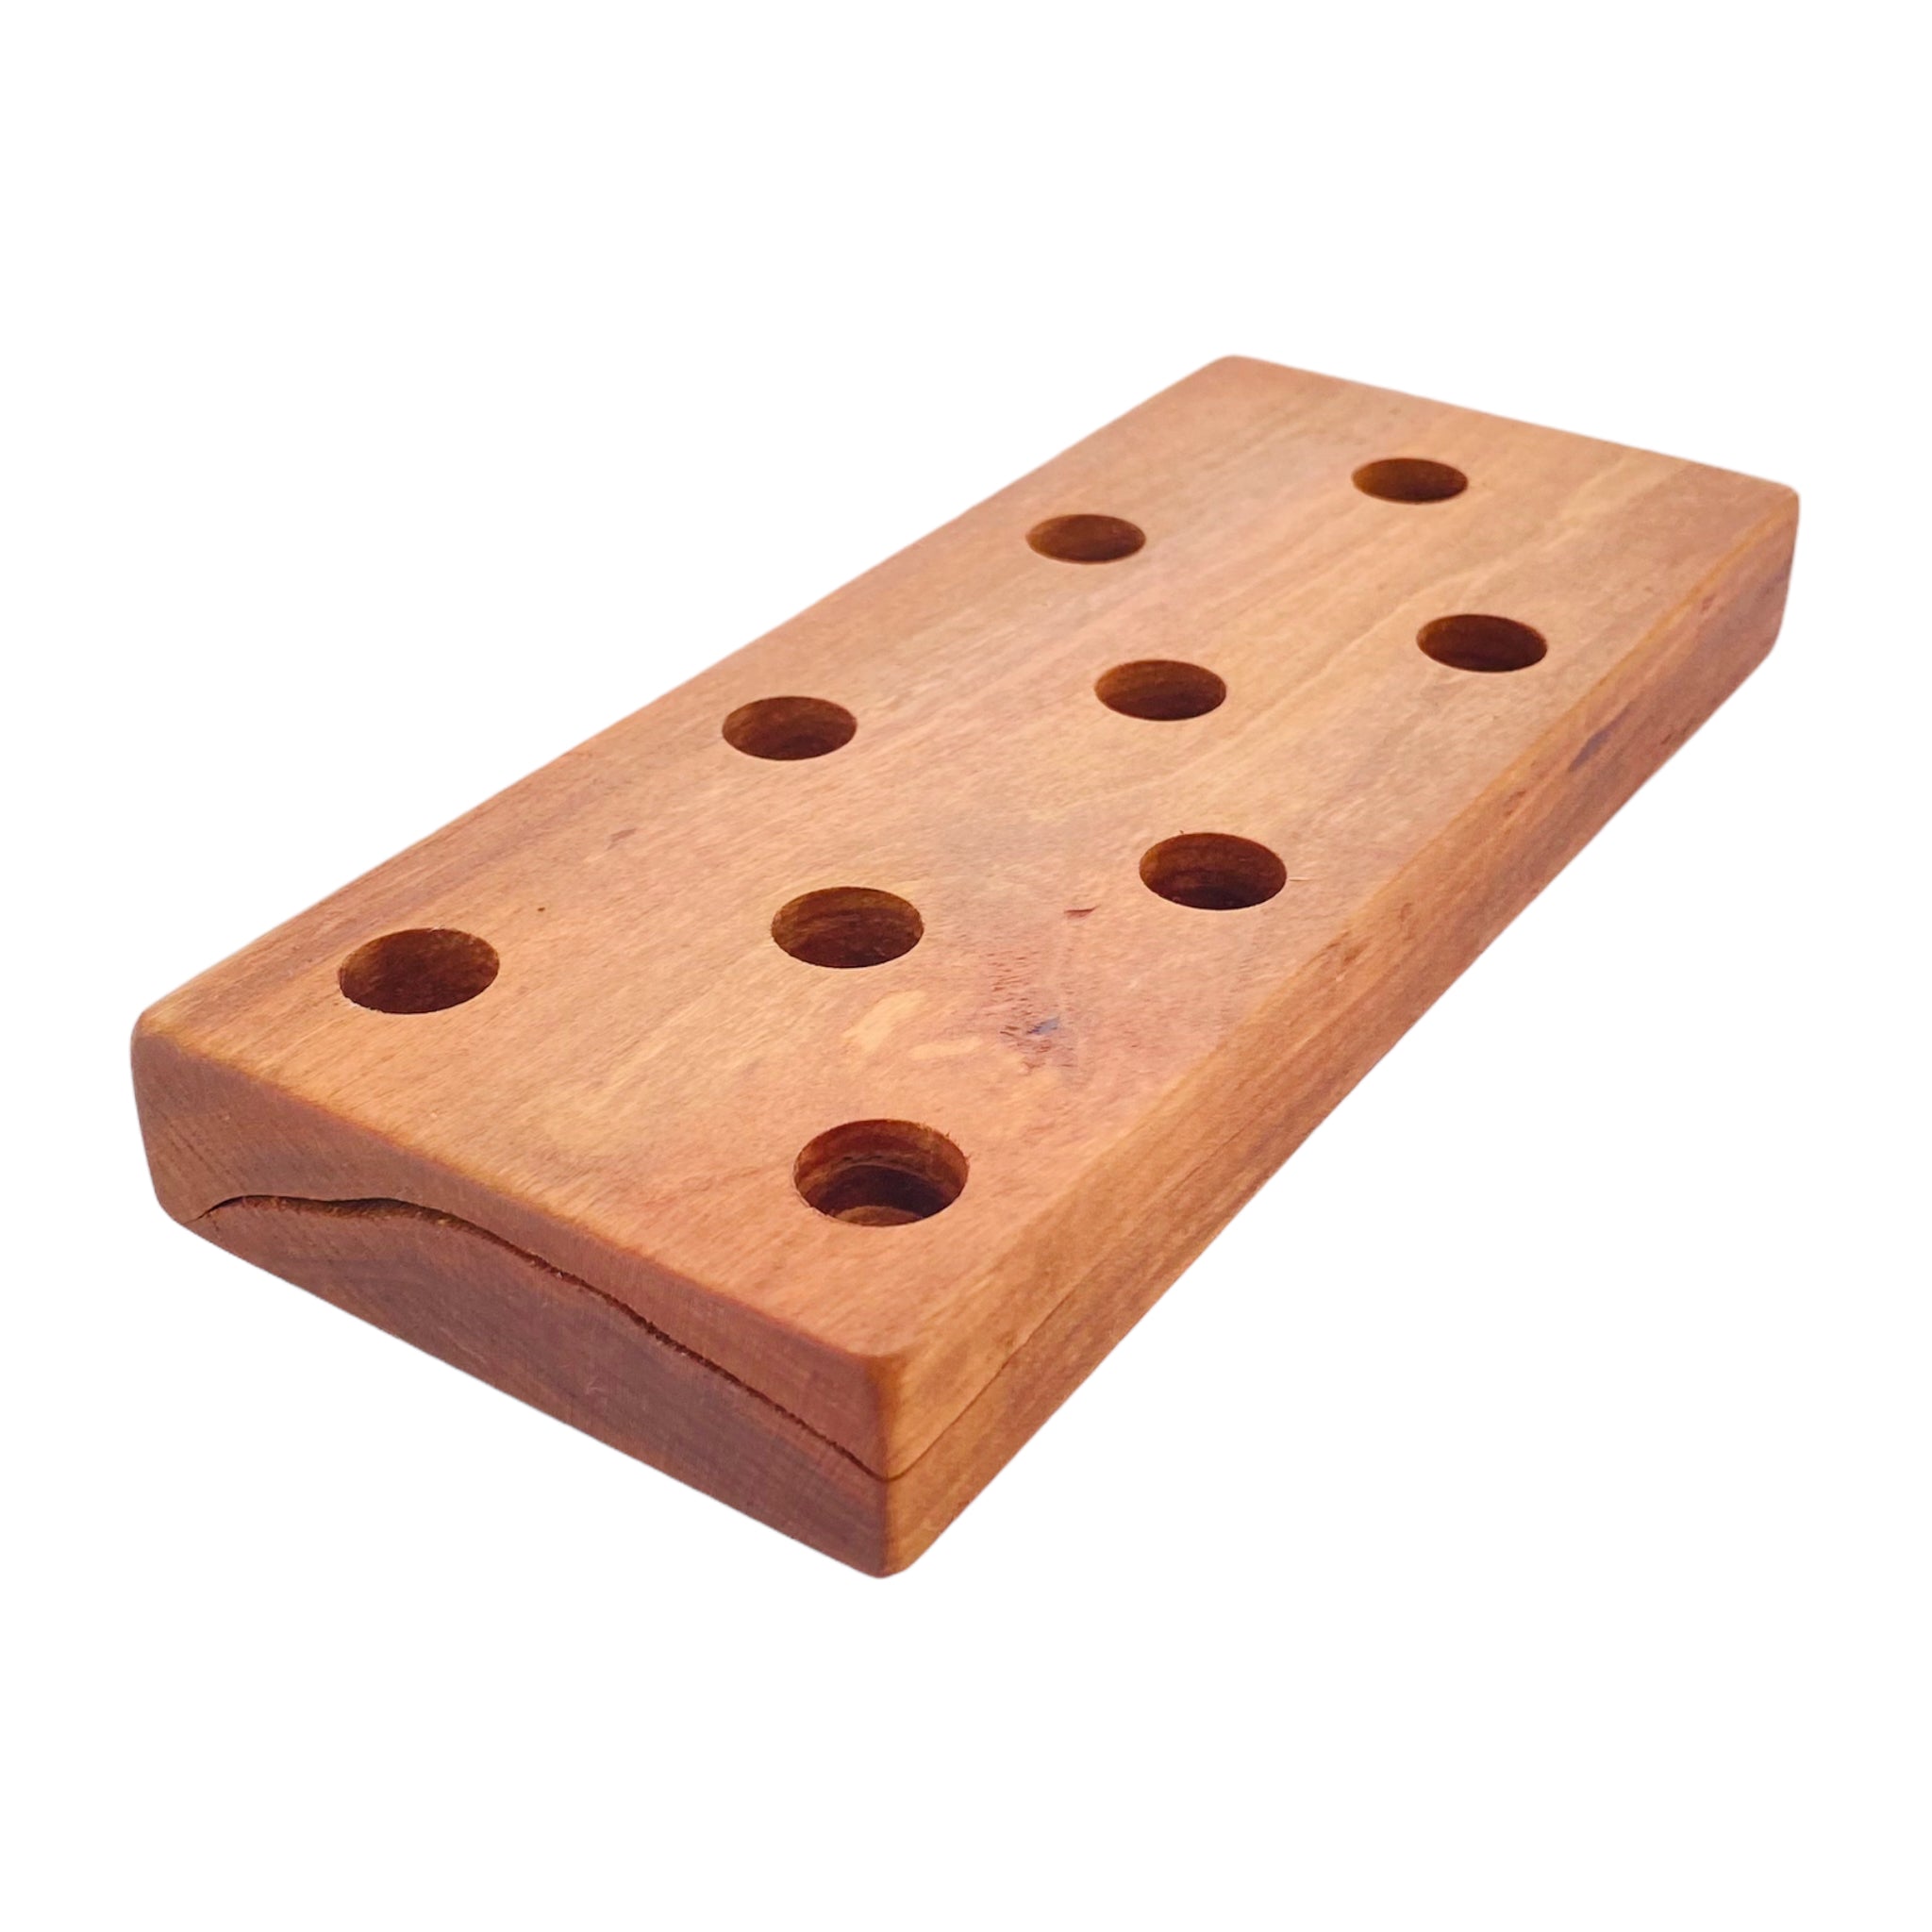 9 Hole Wood Display Stand Holder For 14mm Bong Bowl Pieces Or Quartz Bangers - Cherry Wood